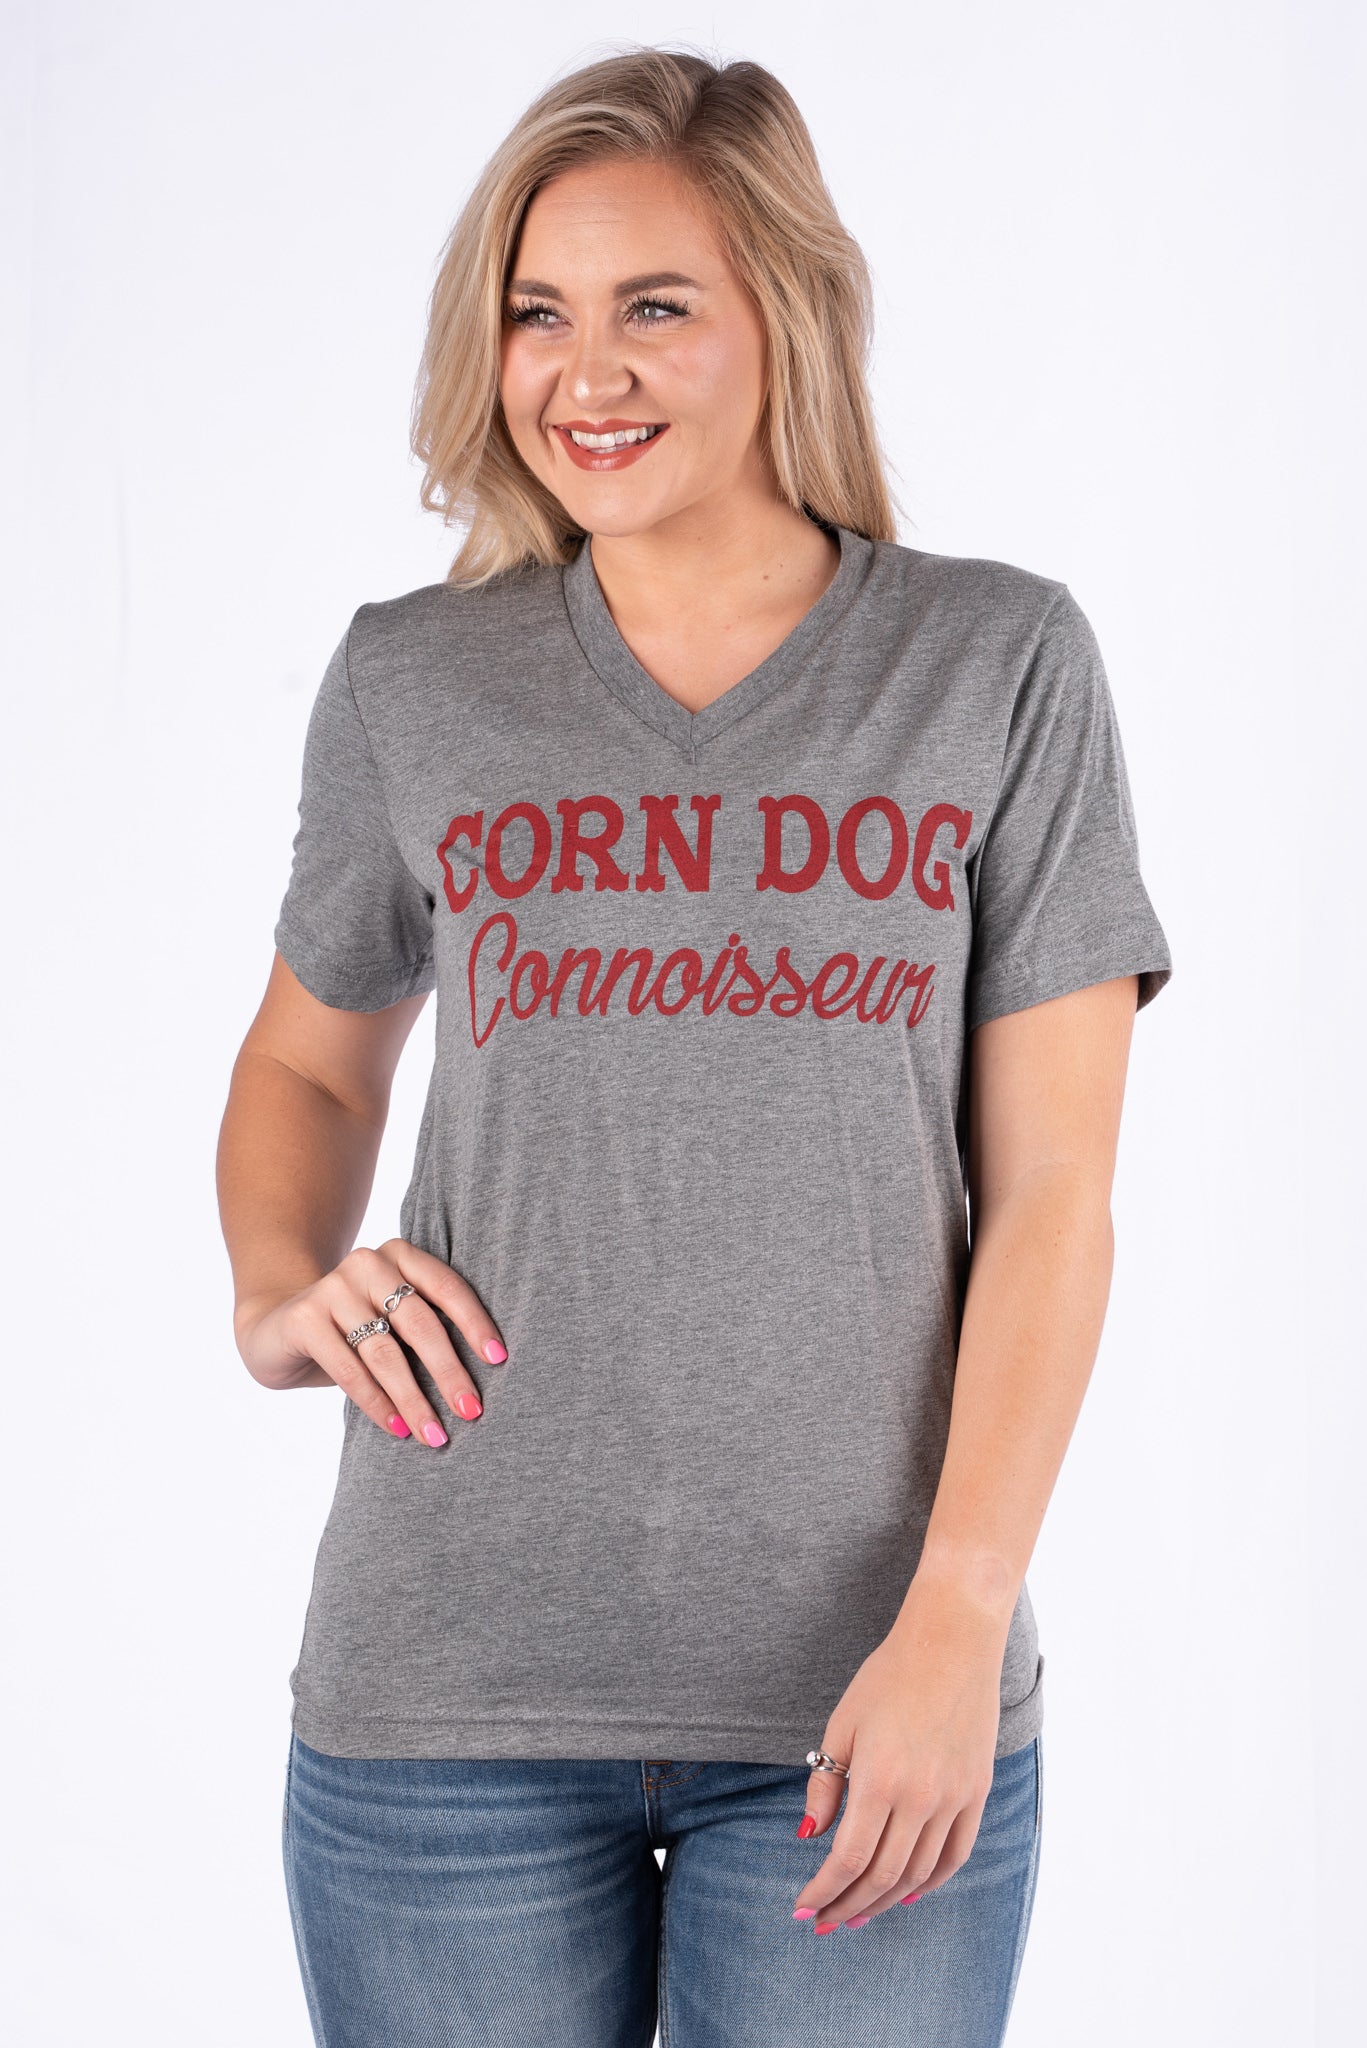 Corn dog connoisseur short sleeve v-neck t-shirt grey - Cute T-shirts - Funny T-Shirts at Lush Fashion Lounge Boutique in Oklahoma City